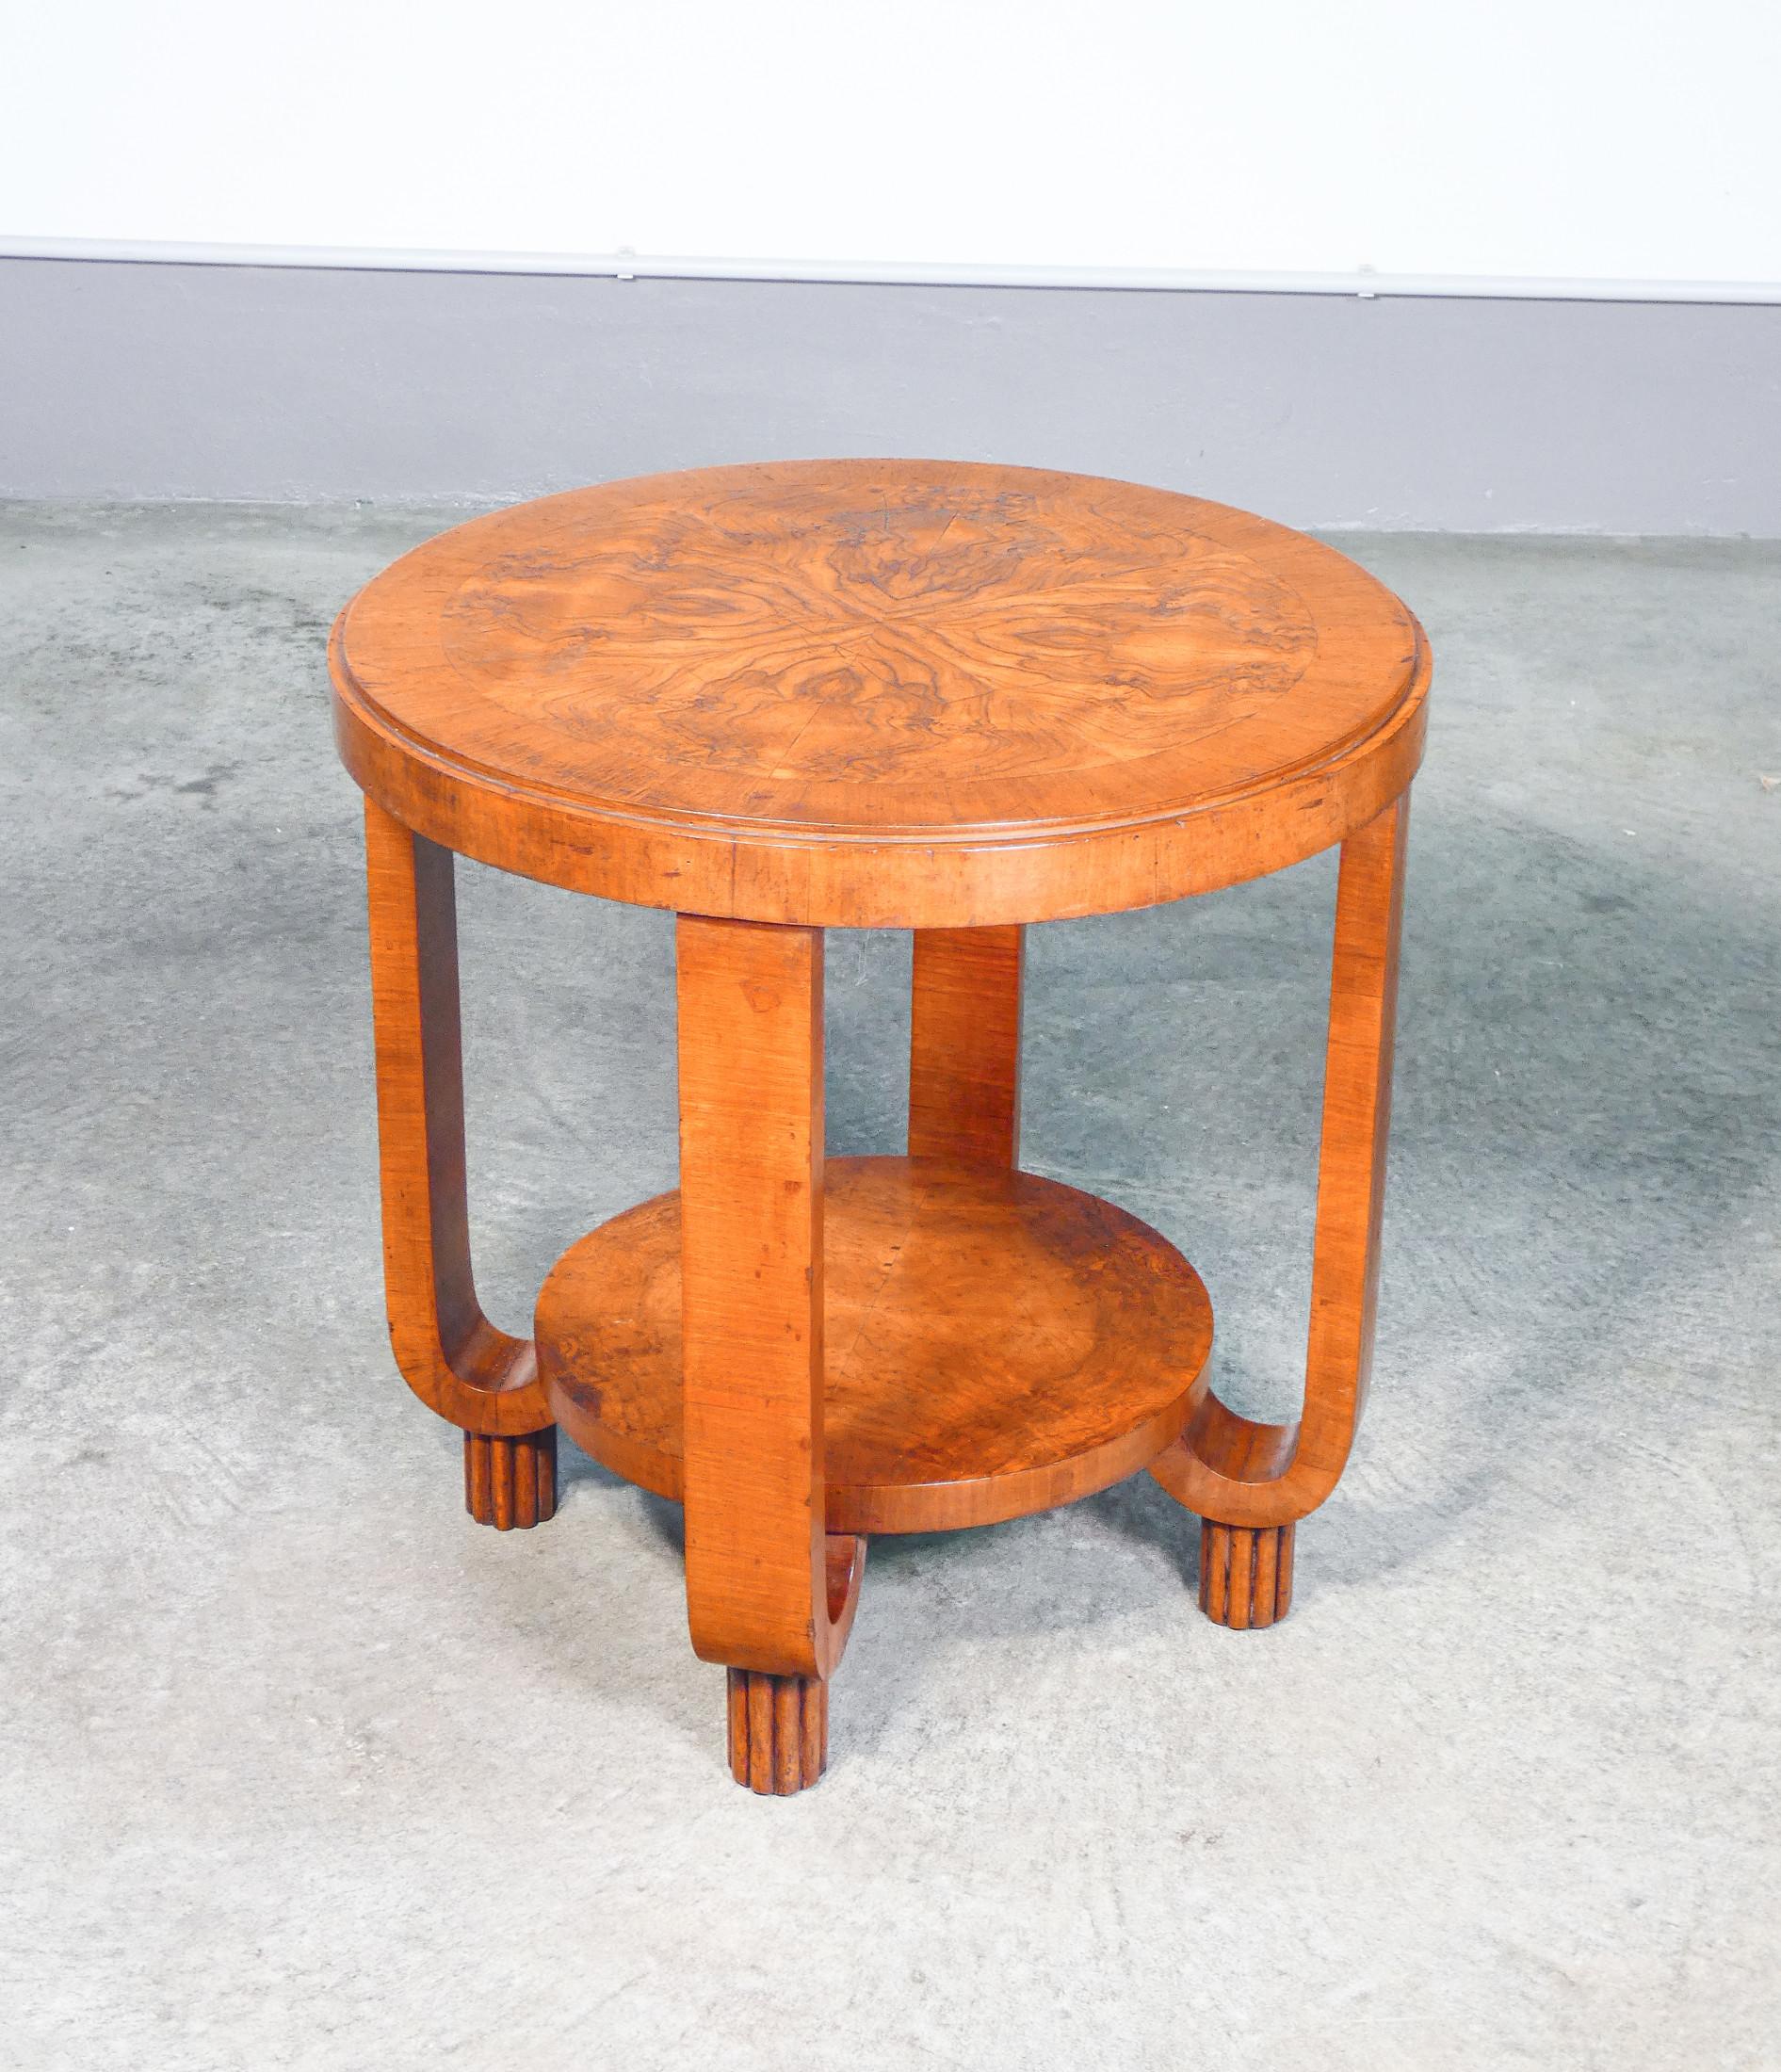 Smoking table
Art Decò
walnut wood and
circular glass top.

PERIOD
1930s

MODEL
Low coffee table,
coffee table

MATERIALS
Walnut wood,
glass top

DIMENSIONS
Ø 61 cm
H 53 cm

CONDITIONS
The coffee table is in excellent condition, as can be seen from